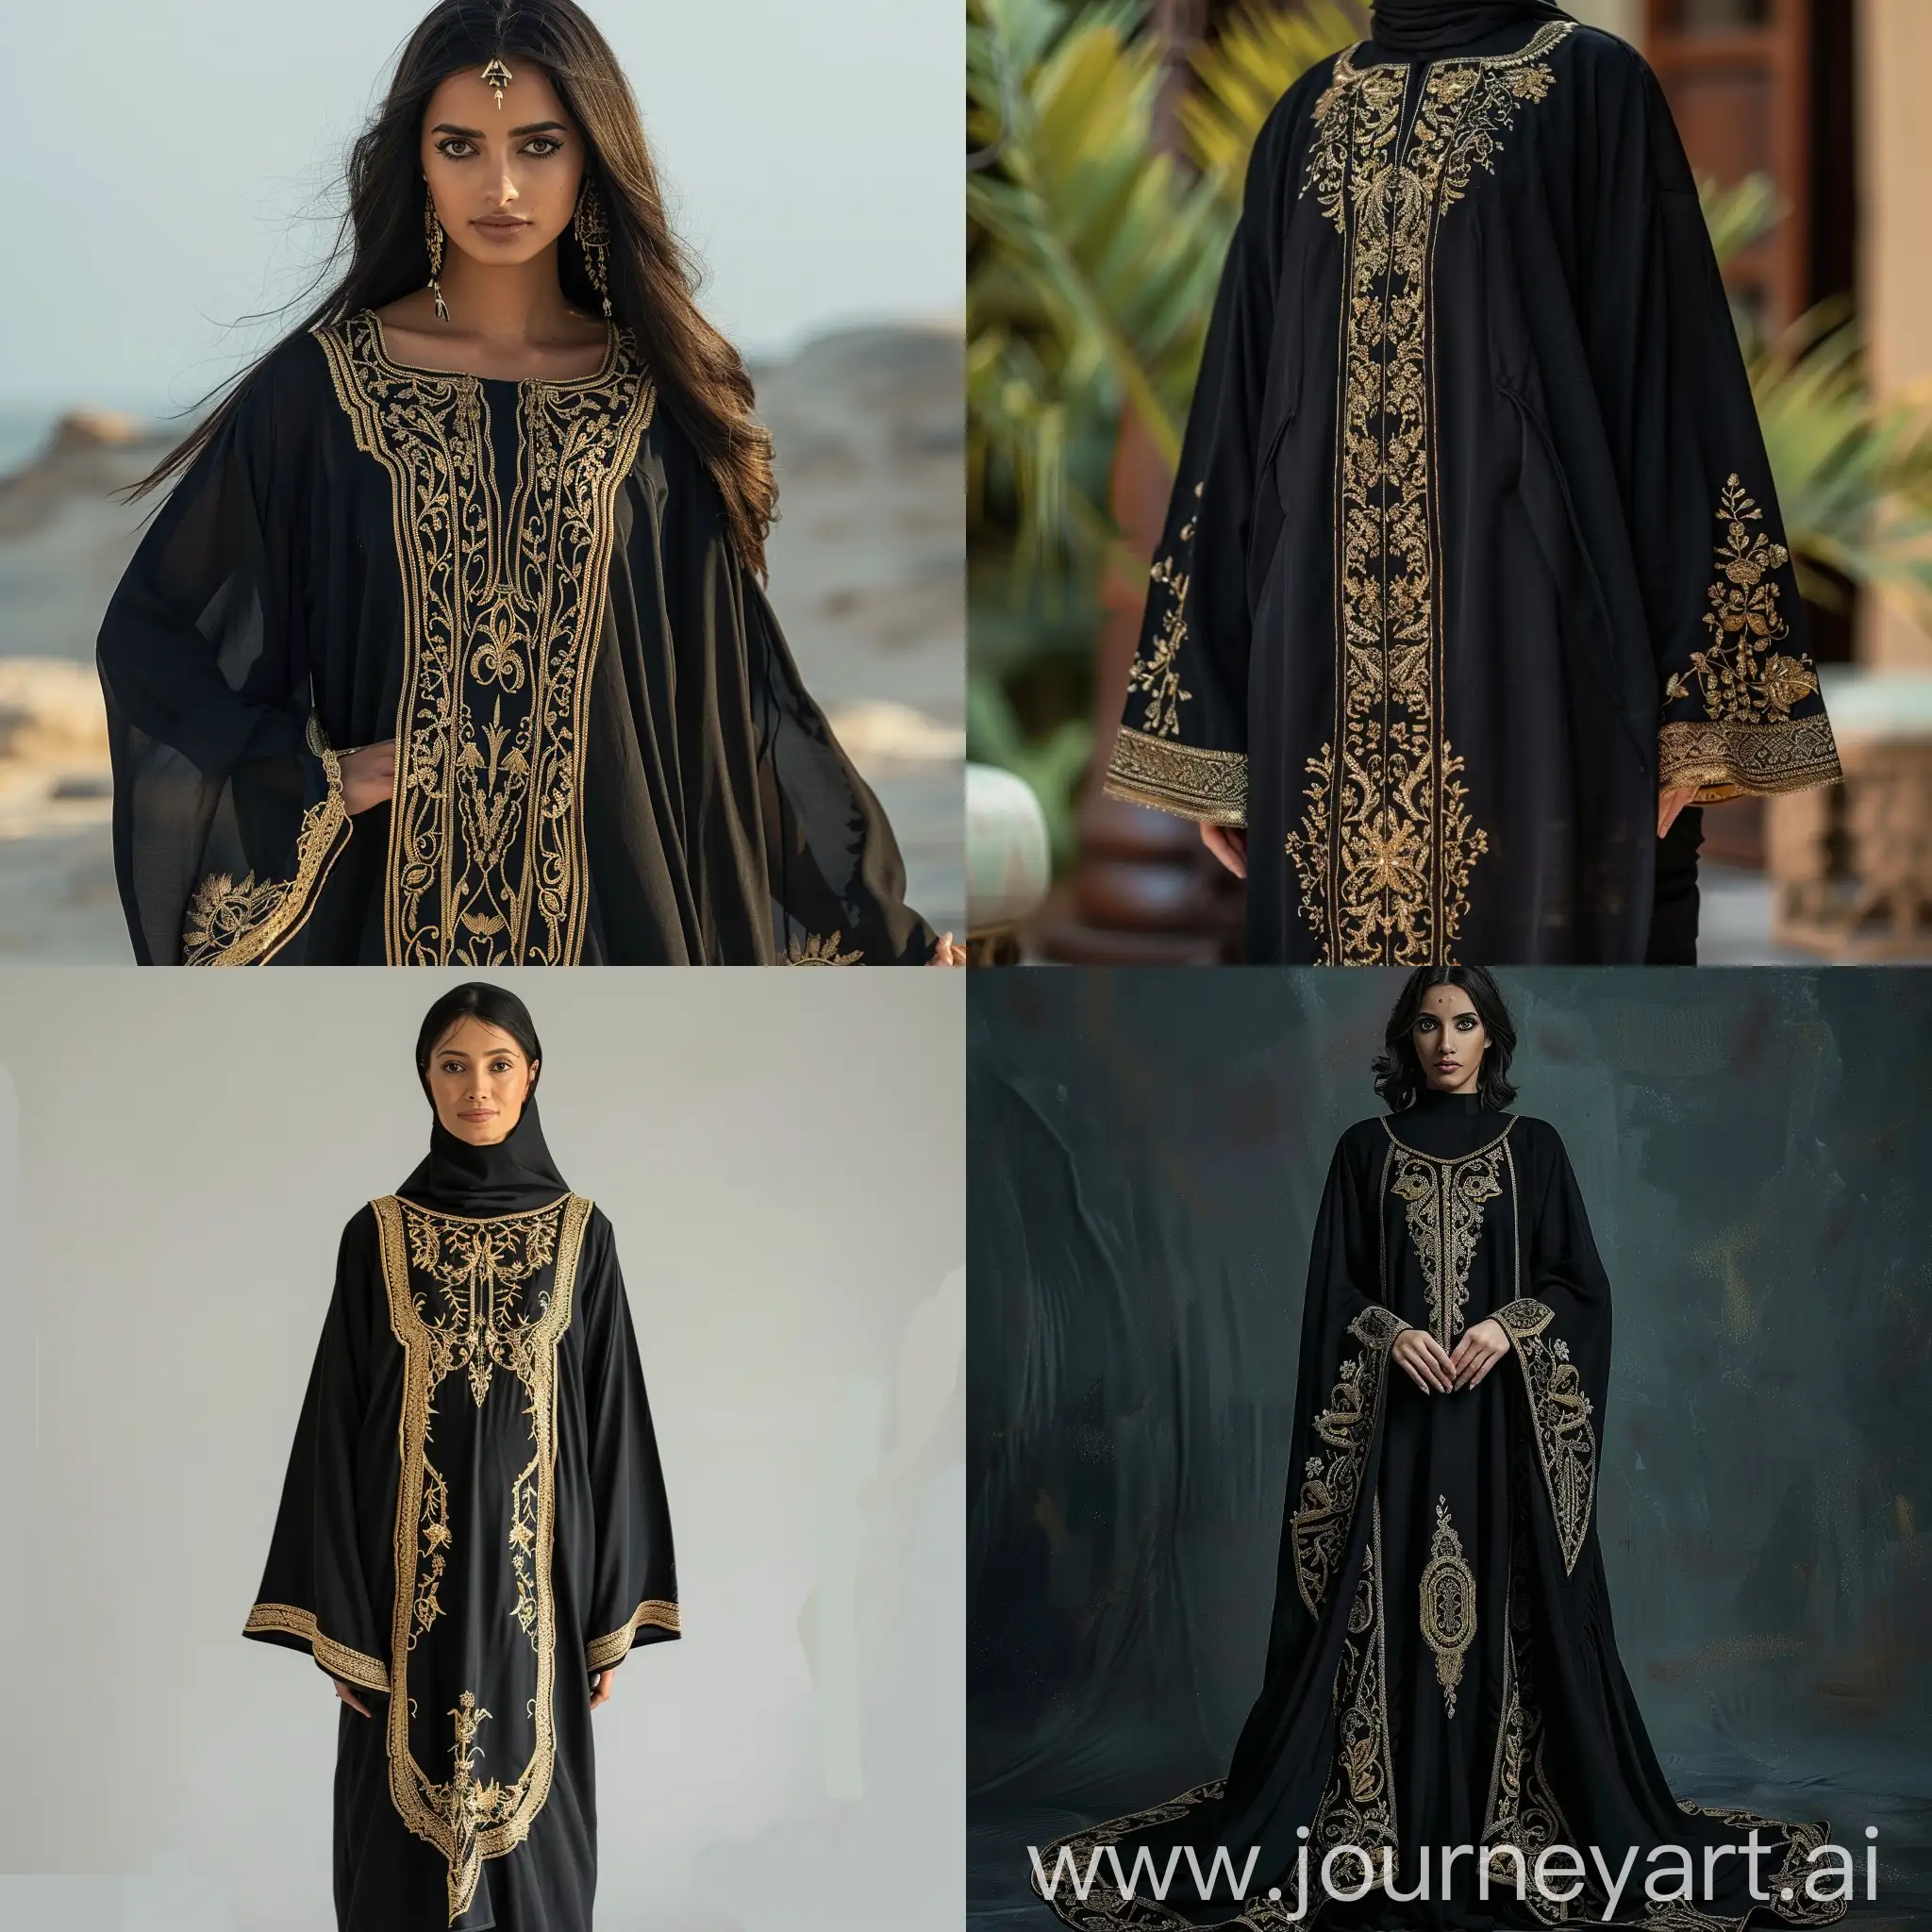 make image,  a 30 years old dressed in an elegant black Caftan with detailed gold embroidery